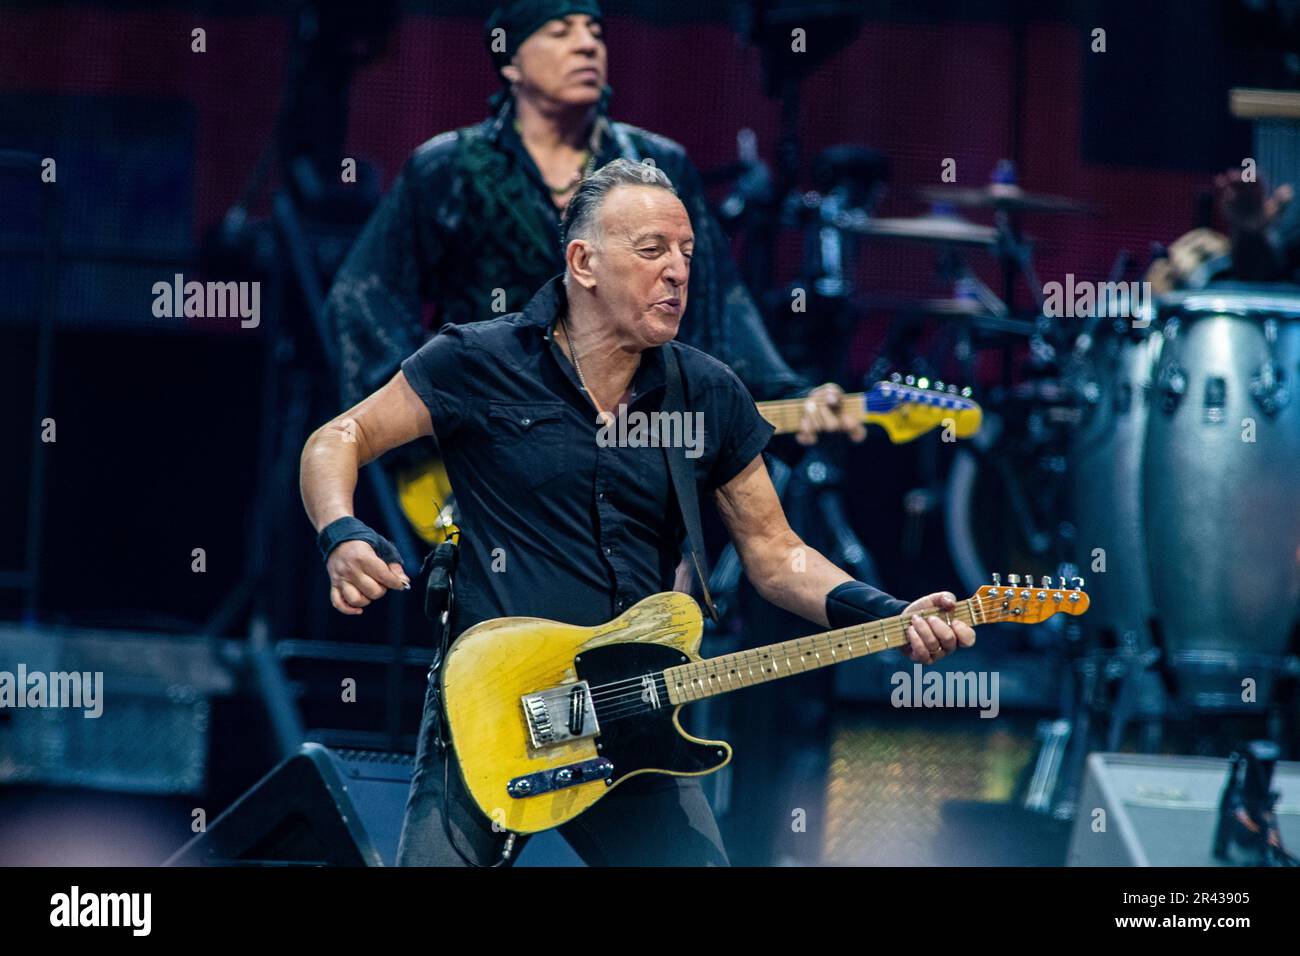 Amsterdam, The Netherlands. May 25, 2023.  Bruce Springsteen and Steven Van Zandt perform with The E Street Band in the Johan Cruijff ArenA during a European stadium tour The Boss. ANP PAUL BERGEN netherlands out - belgium out/Alamy Live News Stock Photo